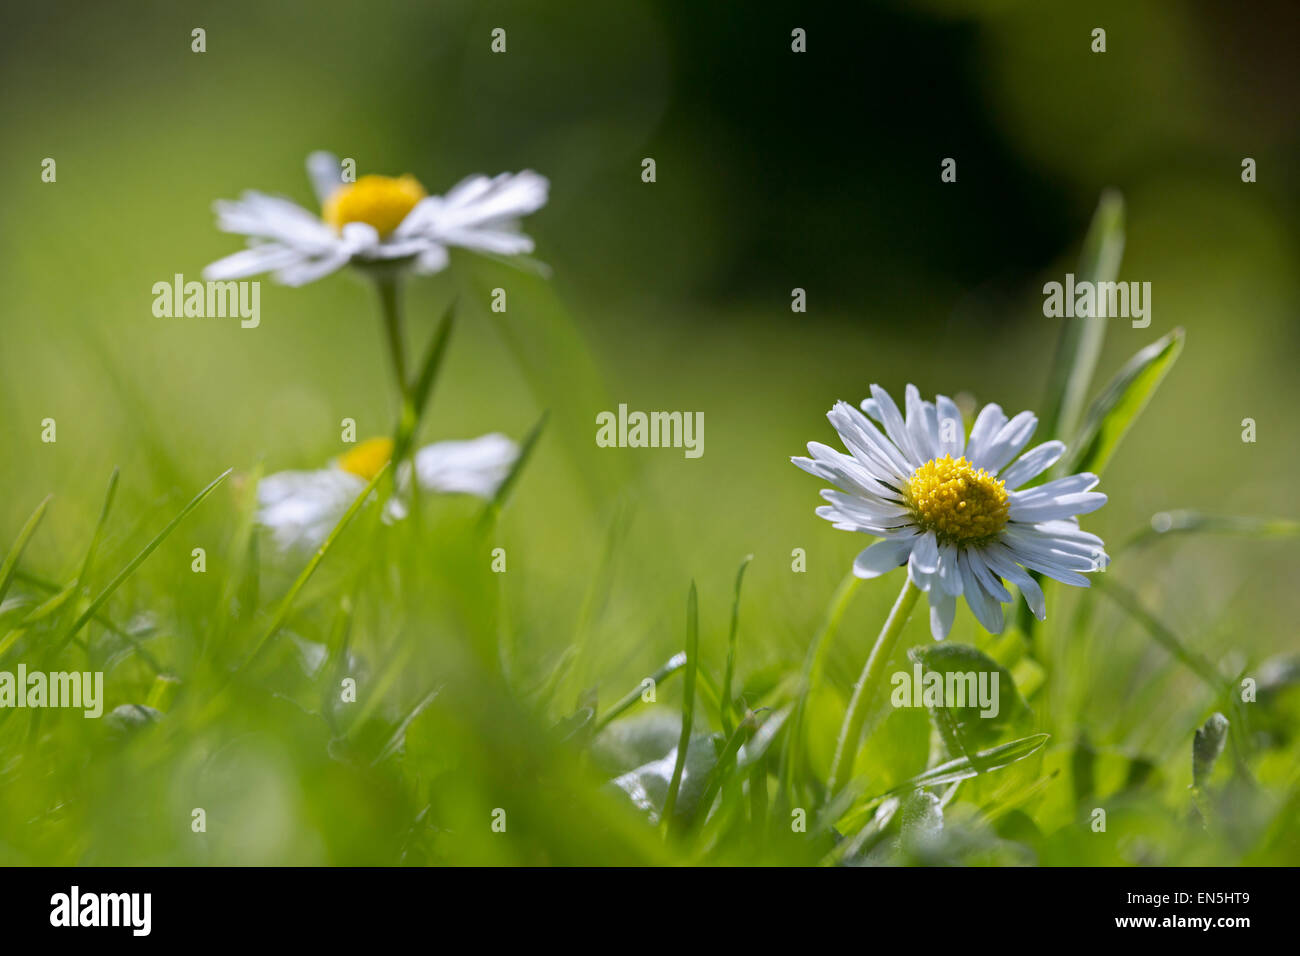 Common daisies / English daisy (Bellis perennis) in flower in meadow Stock Photo